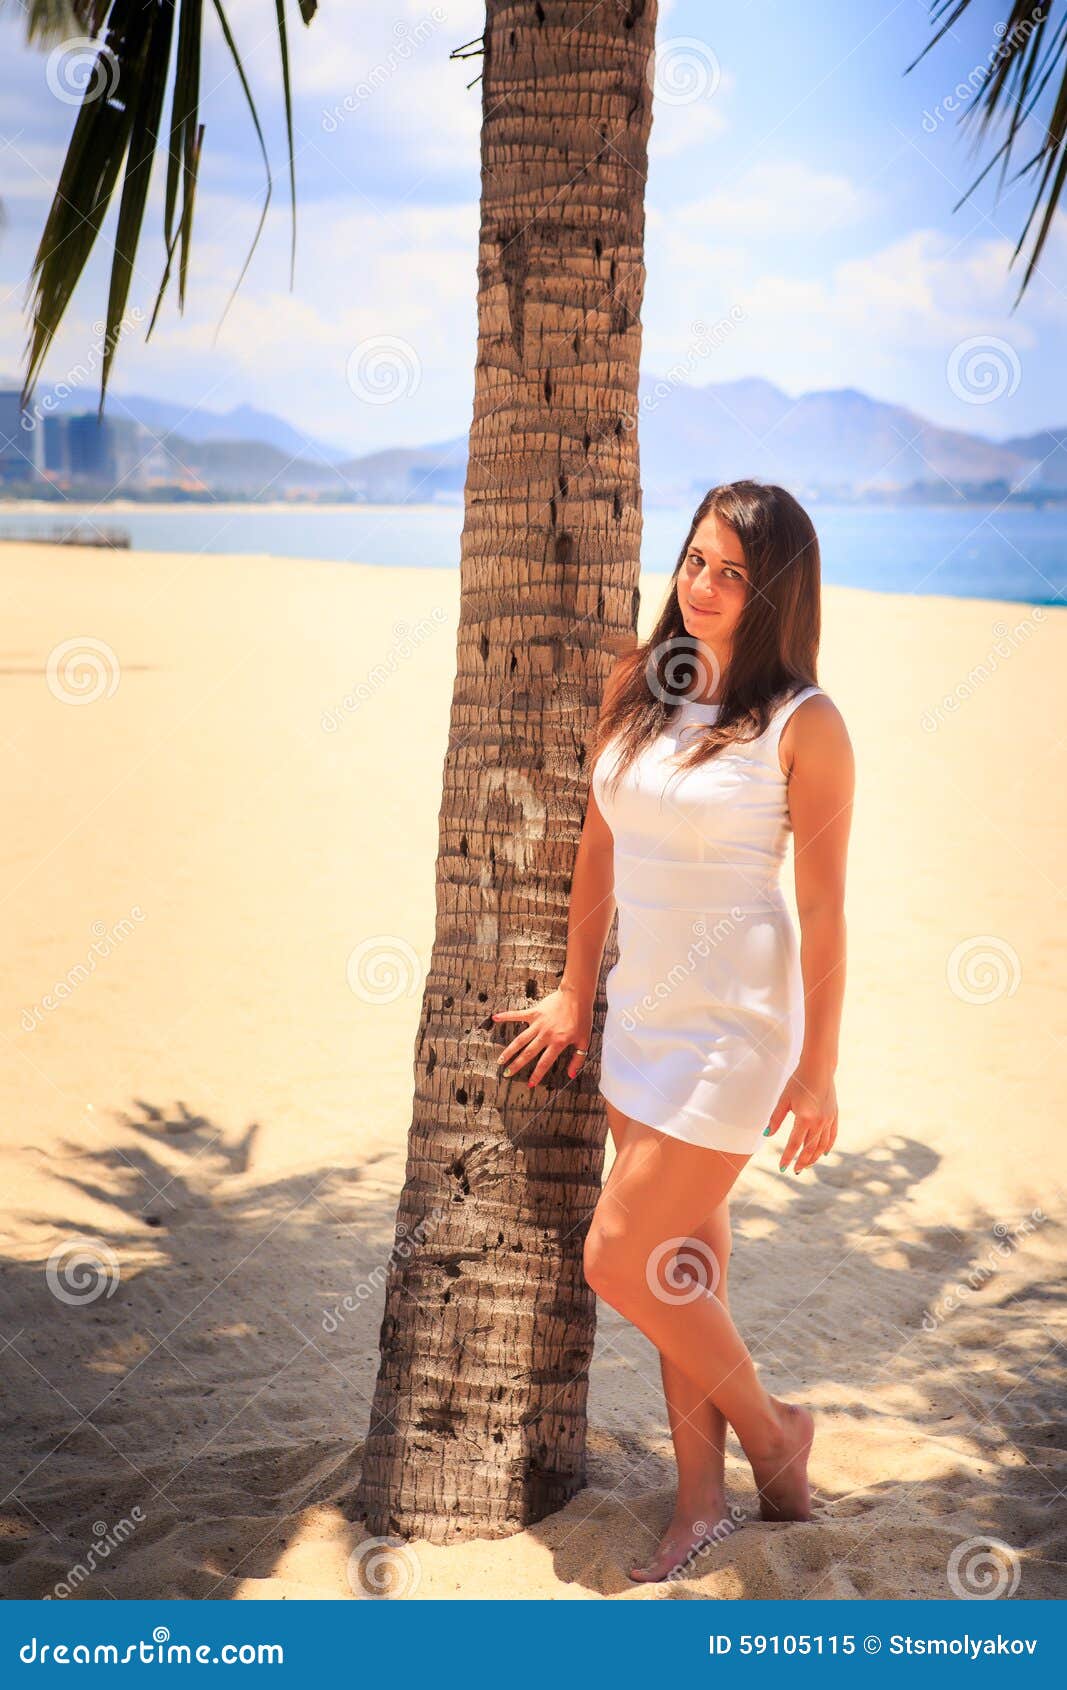 Girl With Big Bust In White Frock Poses By Palm On Beach Stock Image Image Of Coast Frock